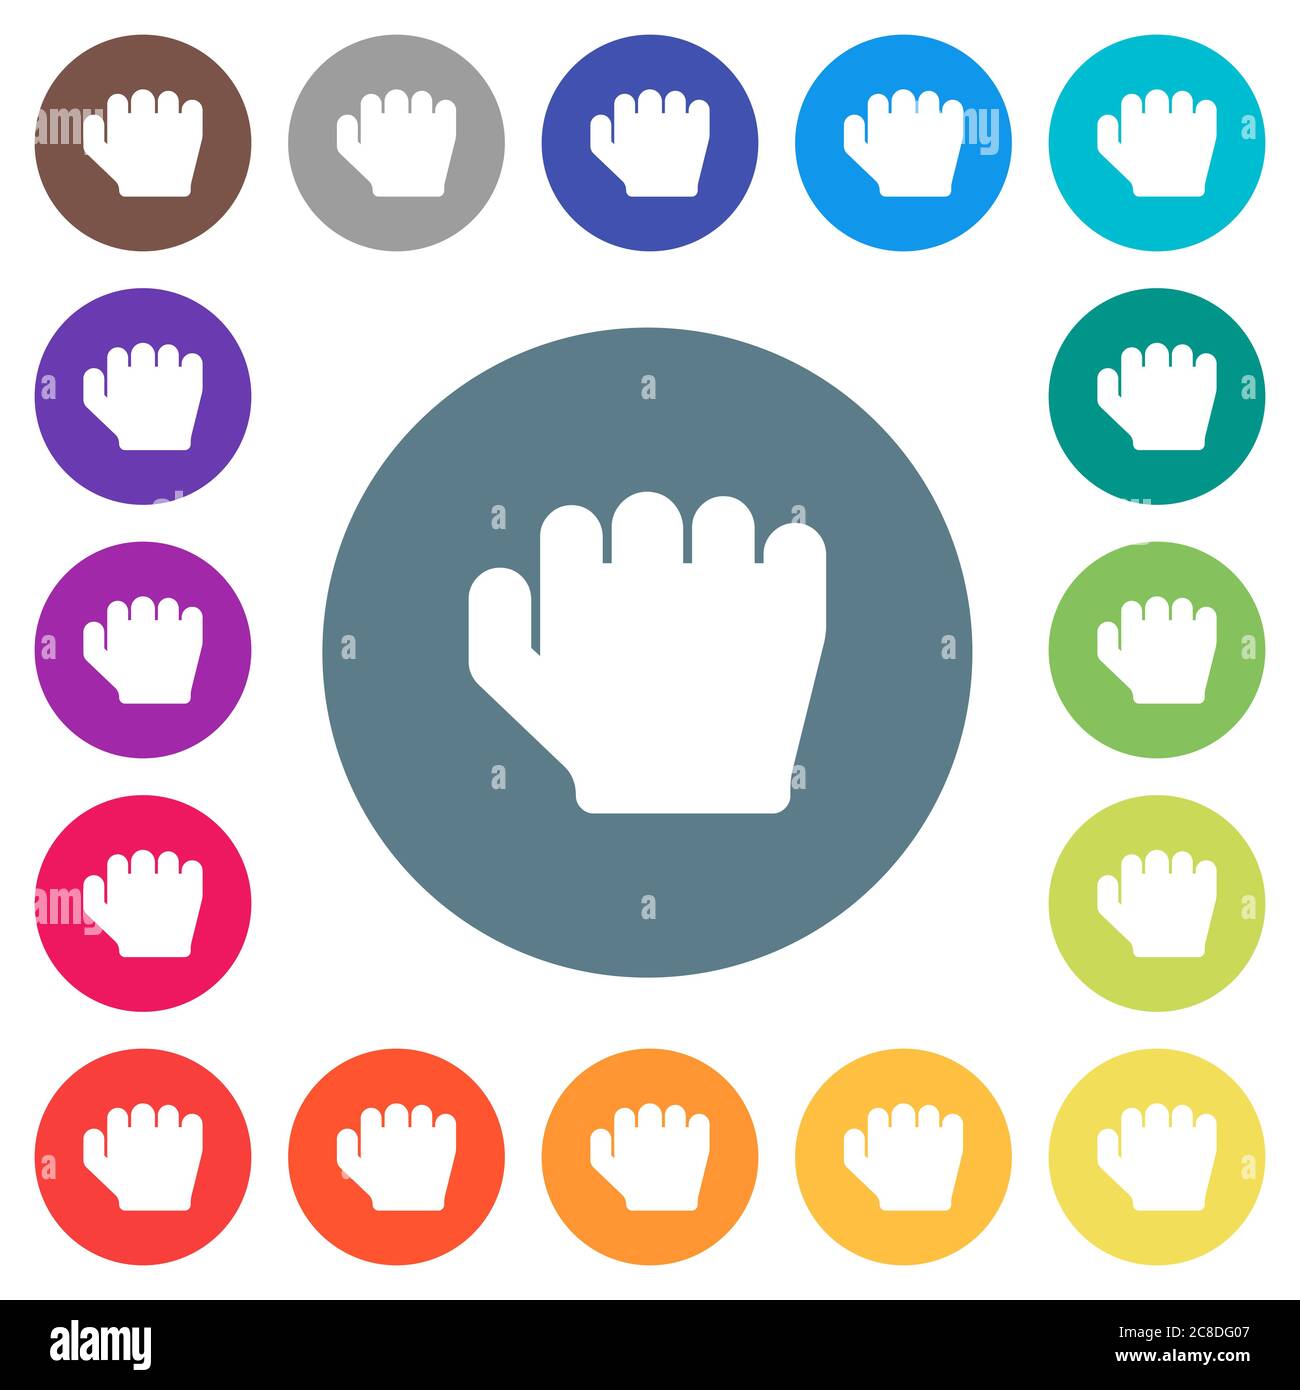 Right handed grab gesture flat white icons on round color backgrounds. 17 background color variations are included. Stock Vector